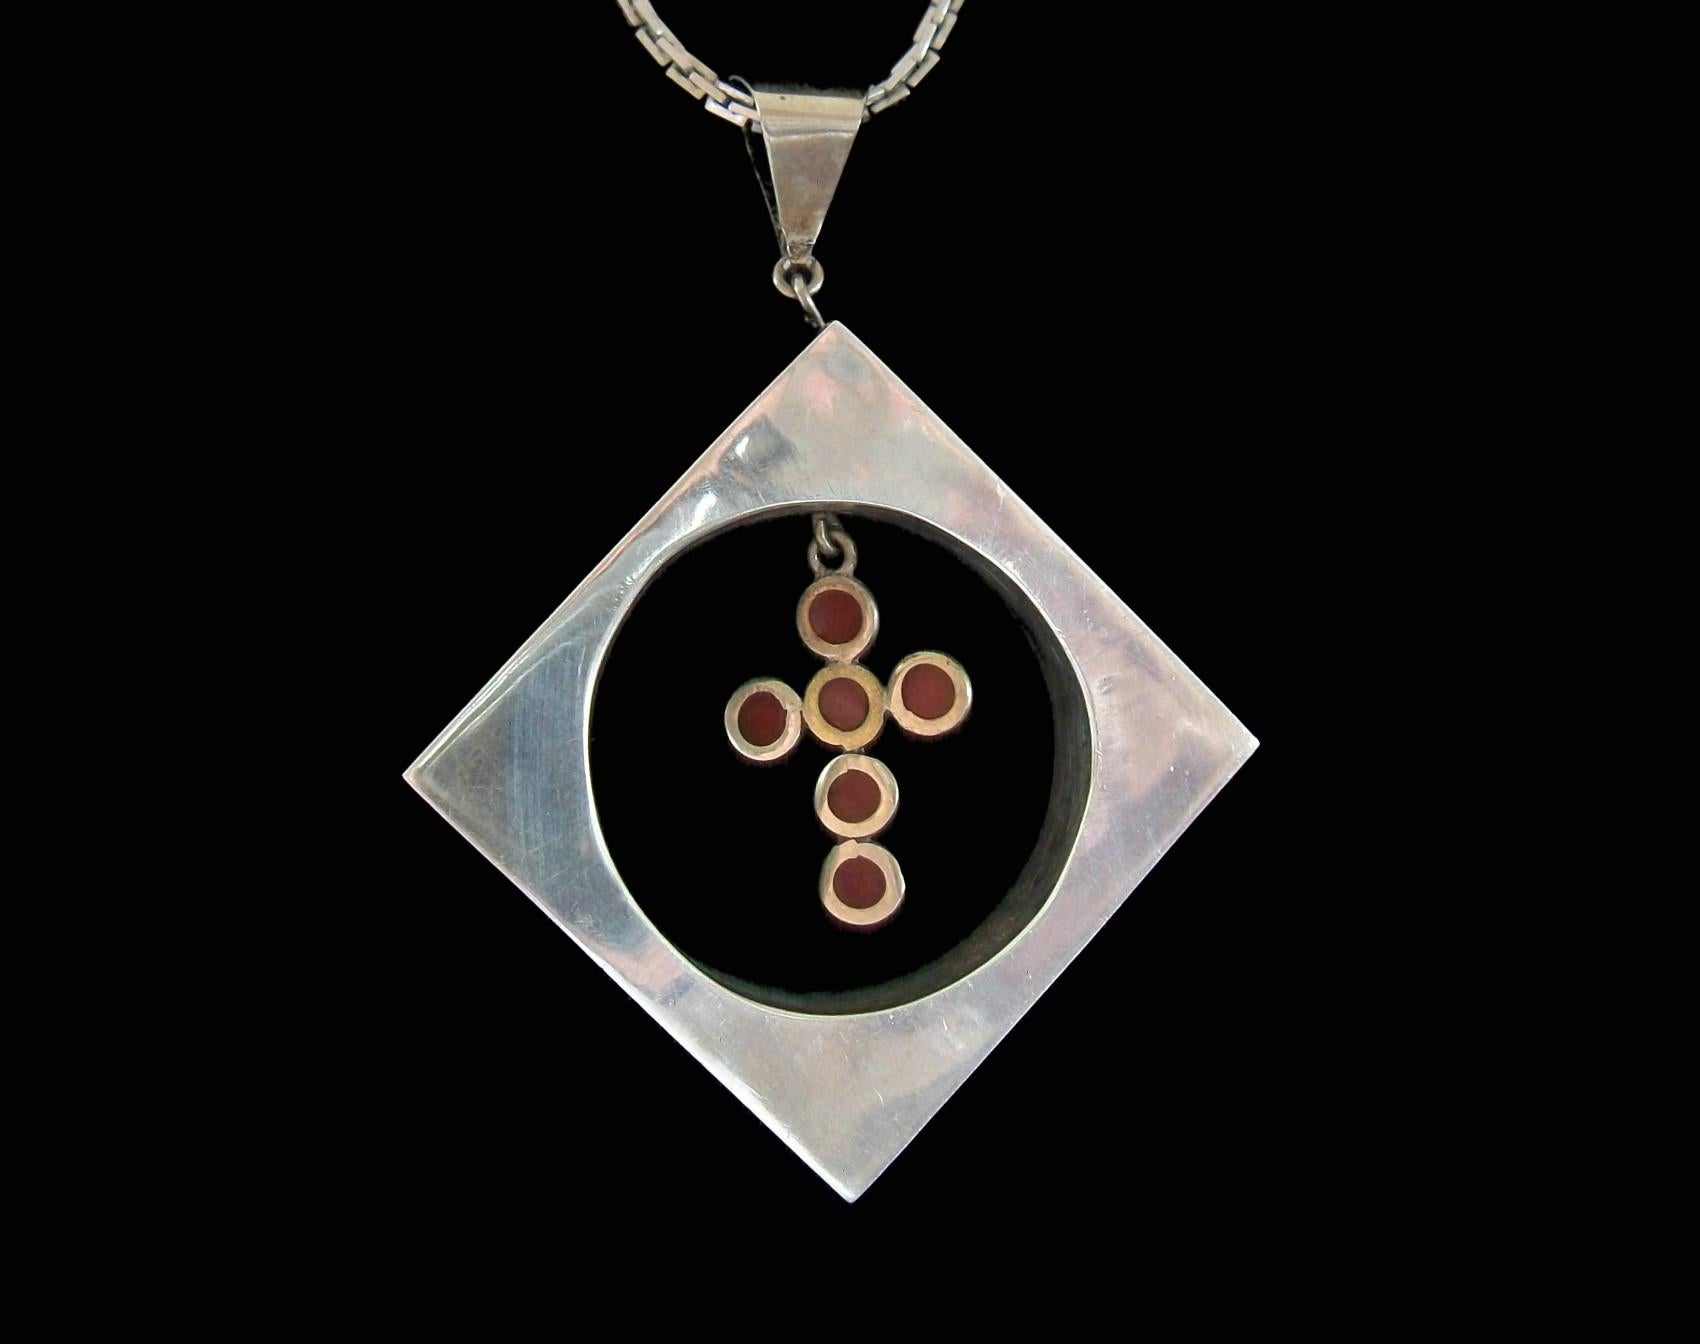 Modernist sterling silver and mixed metals (copper and brass) enameled pendant with plique-à-jour enamel cross - each outside panel with a unique design - hollow construction - large bale (1/2